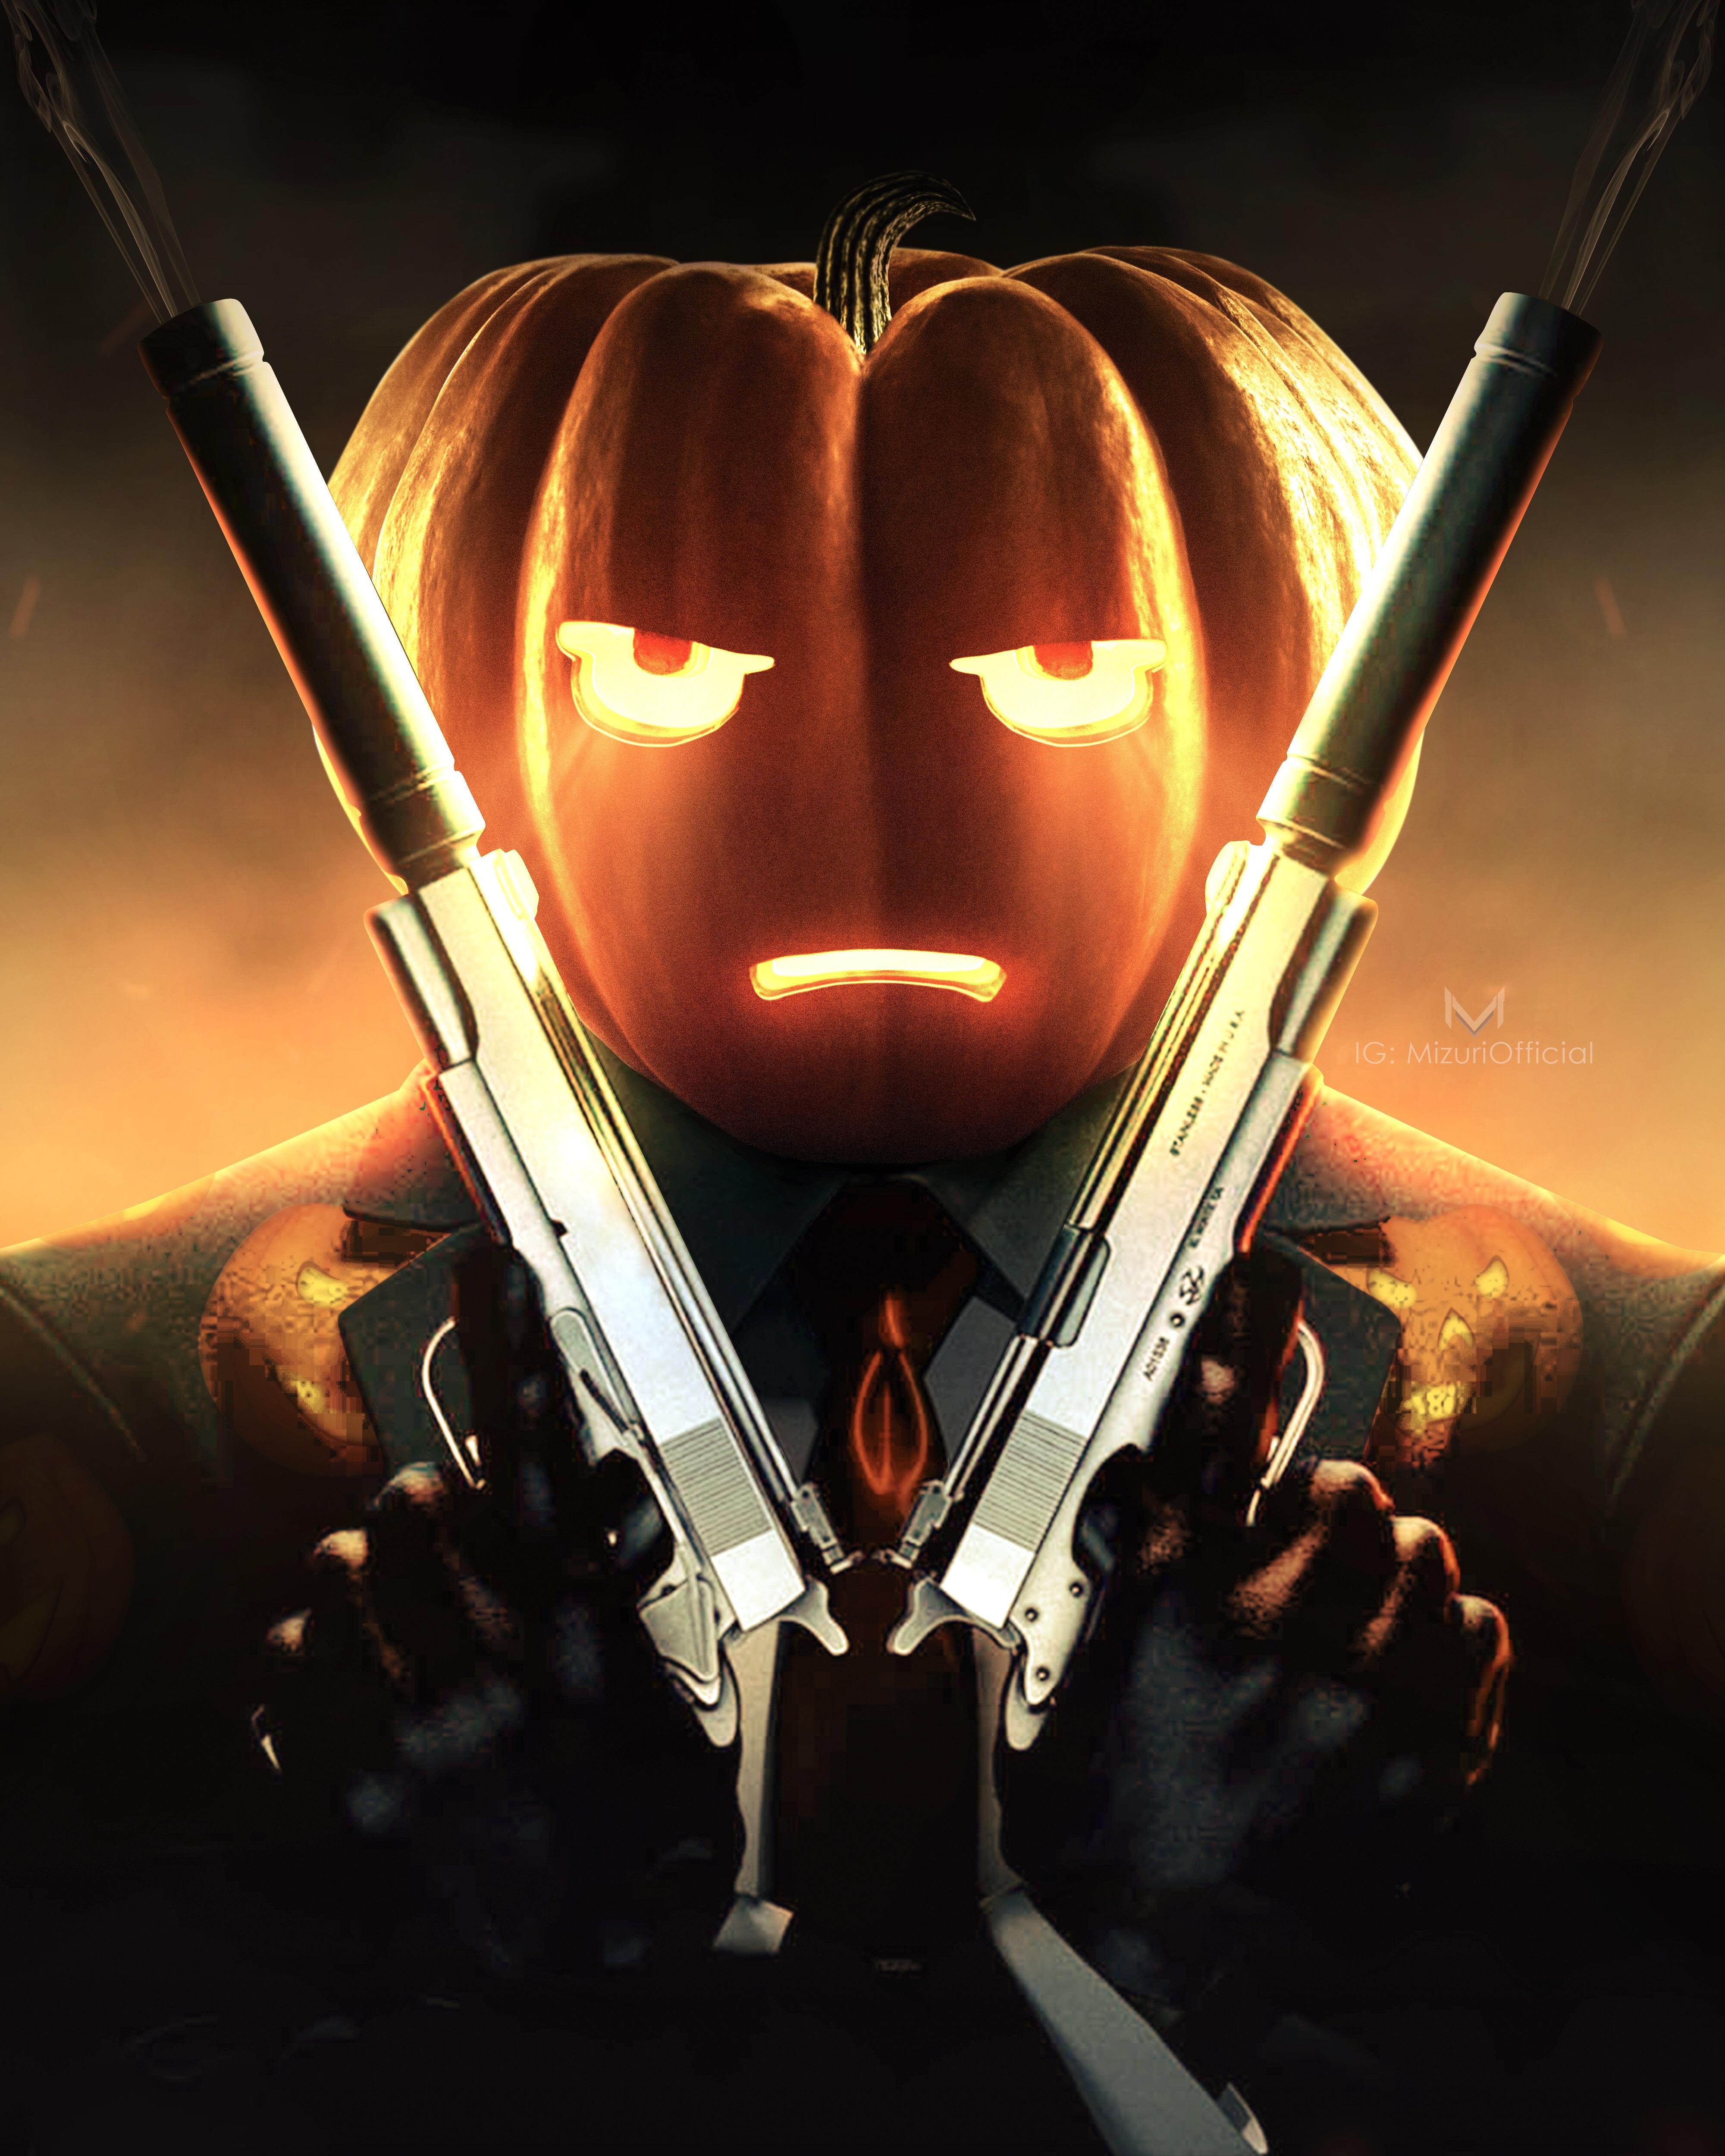 Fortnite's Jack Gourdon meets Hitman! Hey all, decided to make